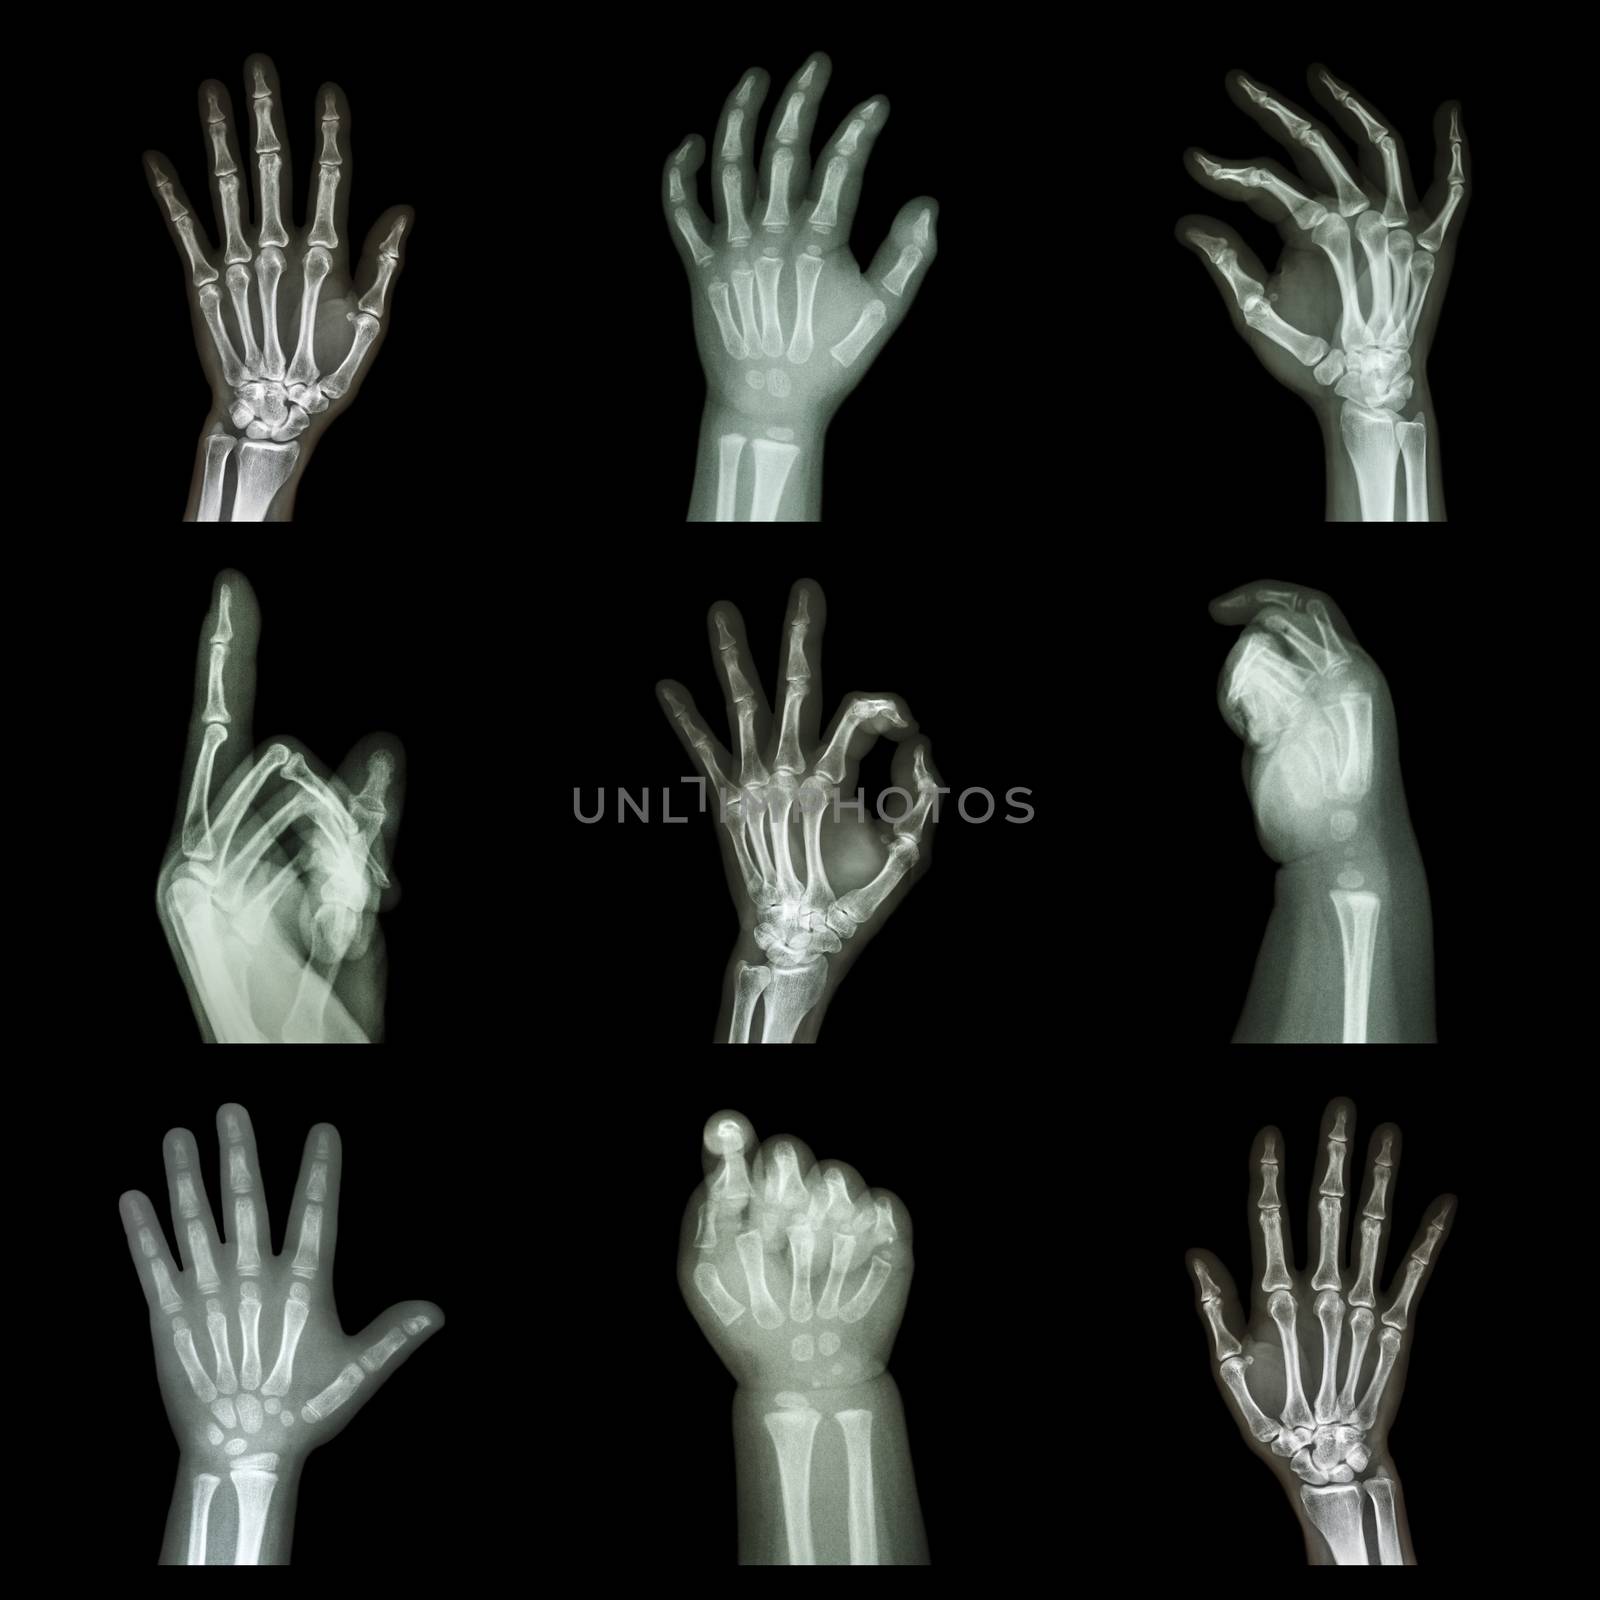 Collection x-ray of hands by stockdevil